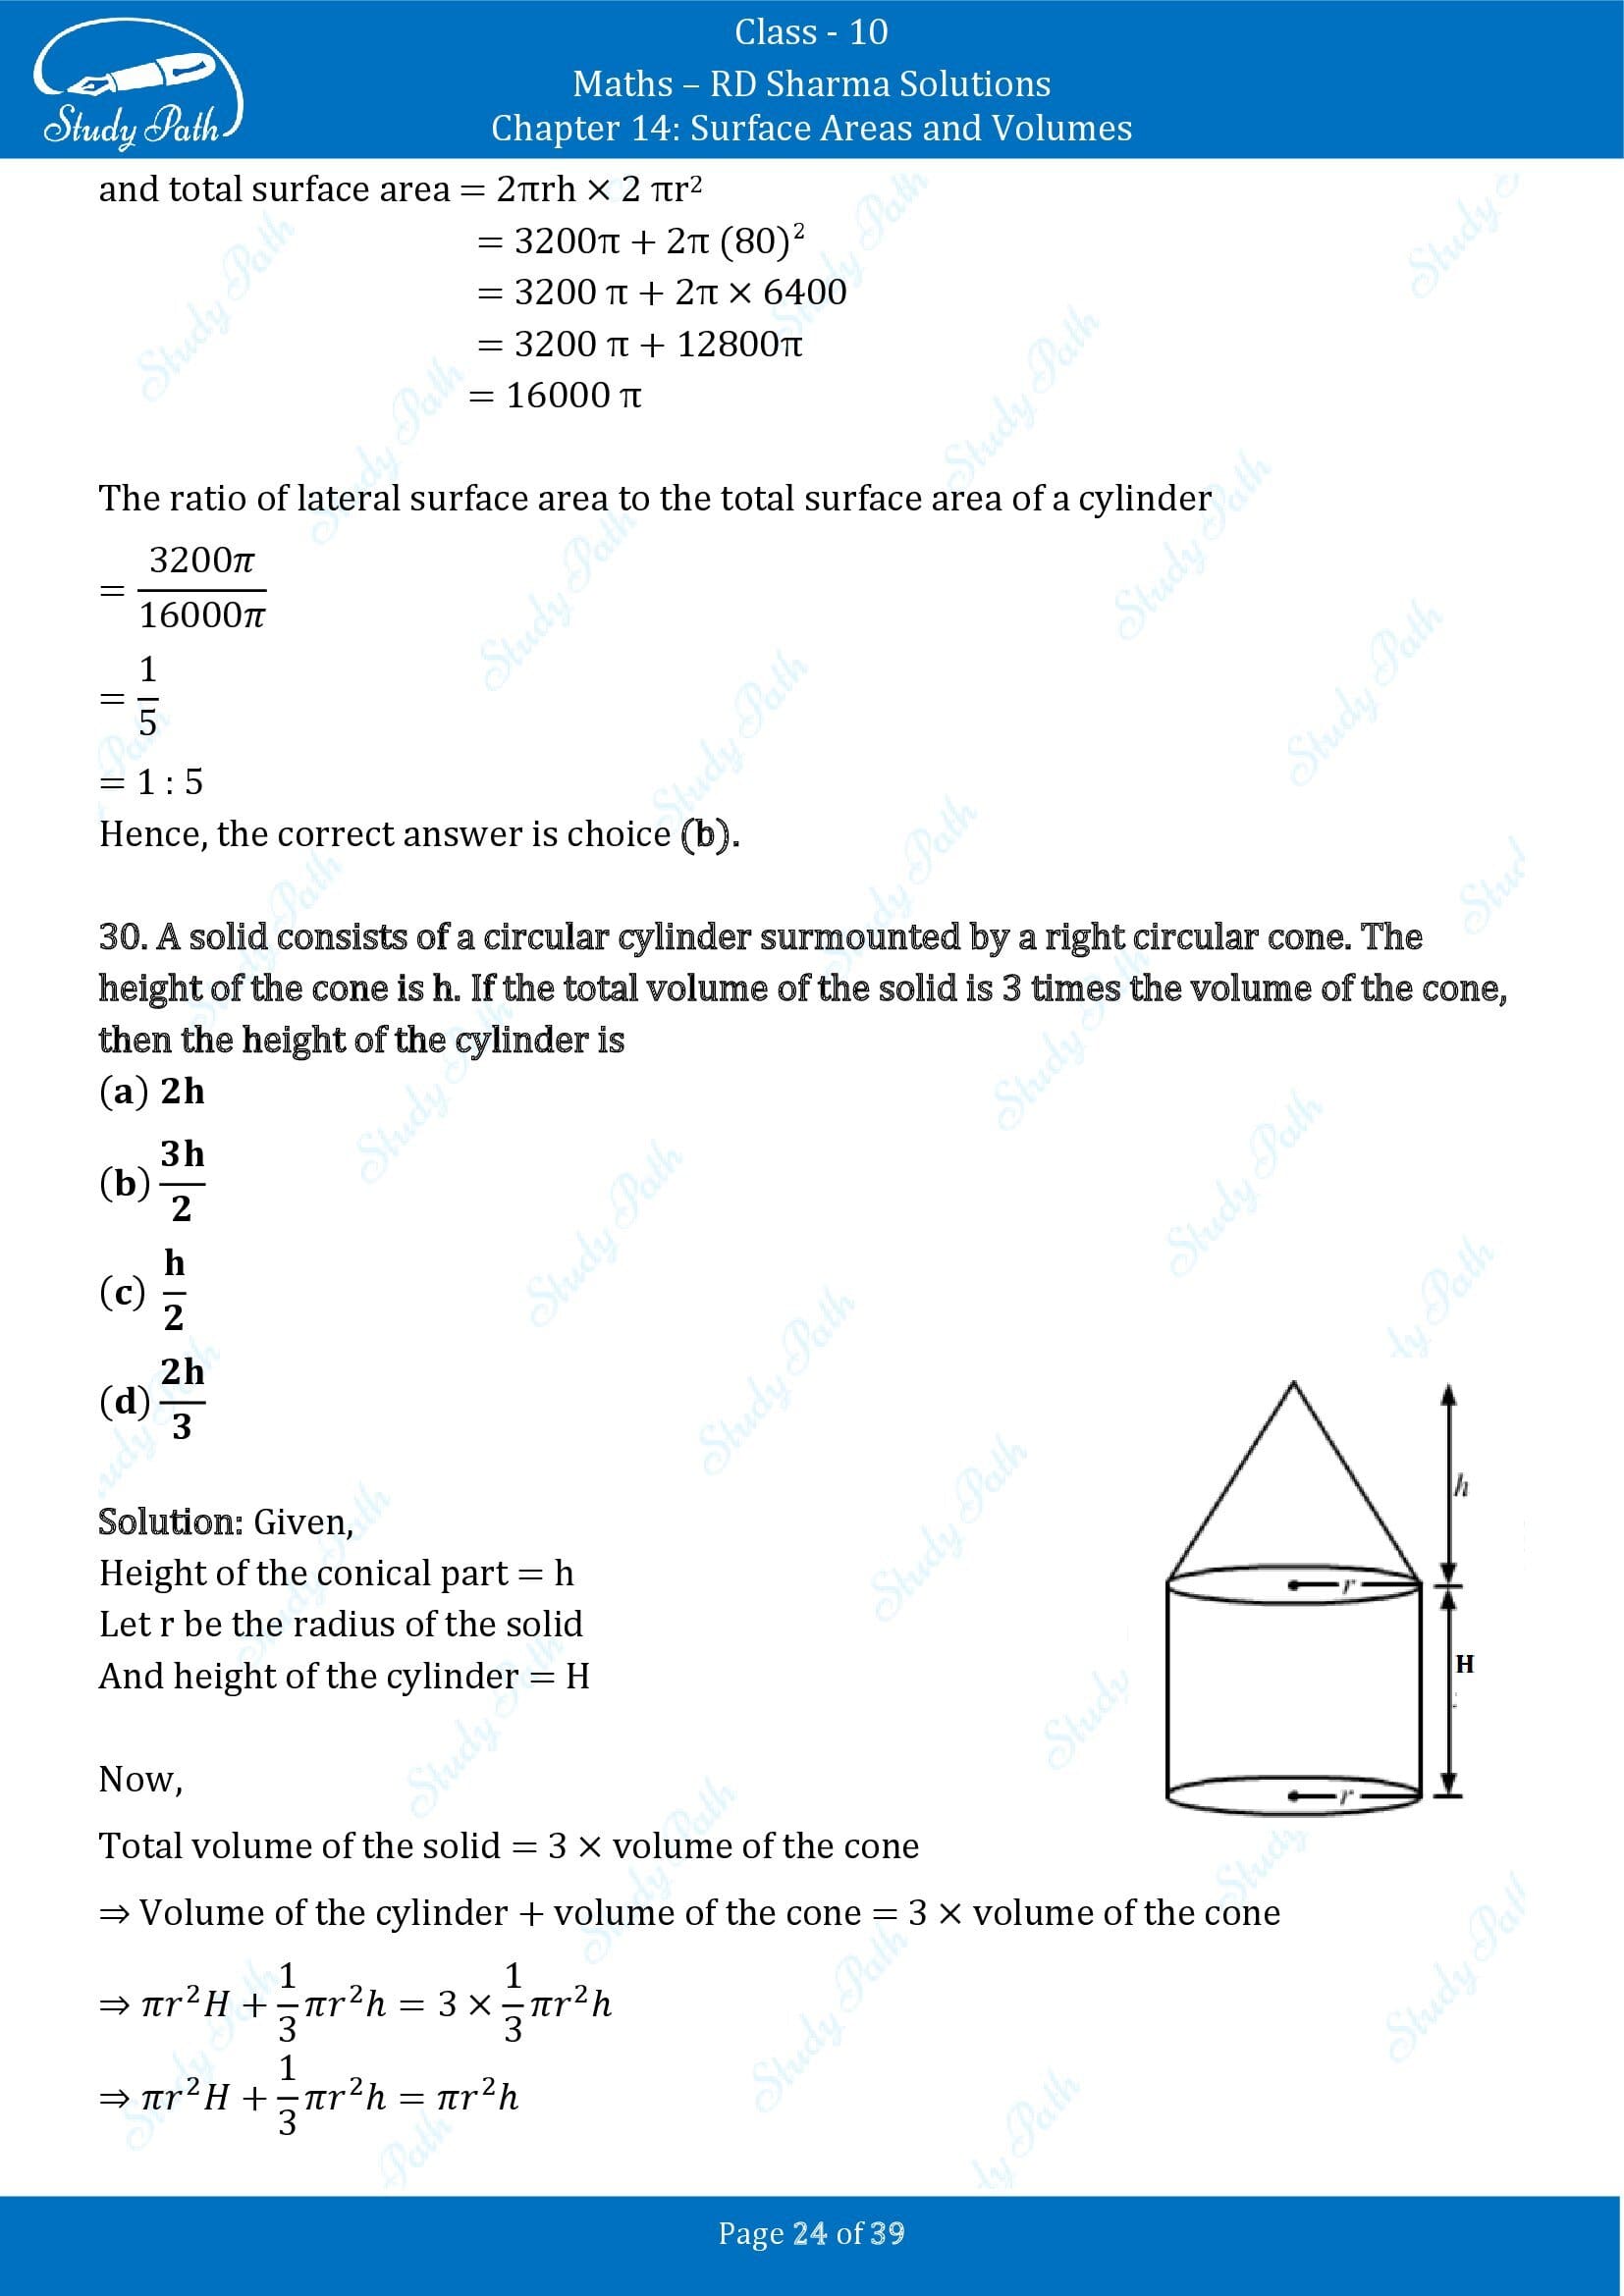 RD Sharma Solutions Class 10 Chapter 14 Surface Areas and Volumes Multiple Choice Question MCQs 00024